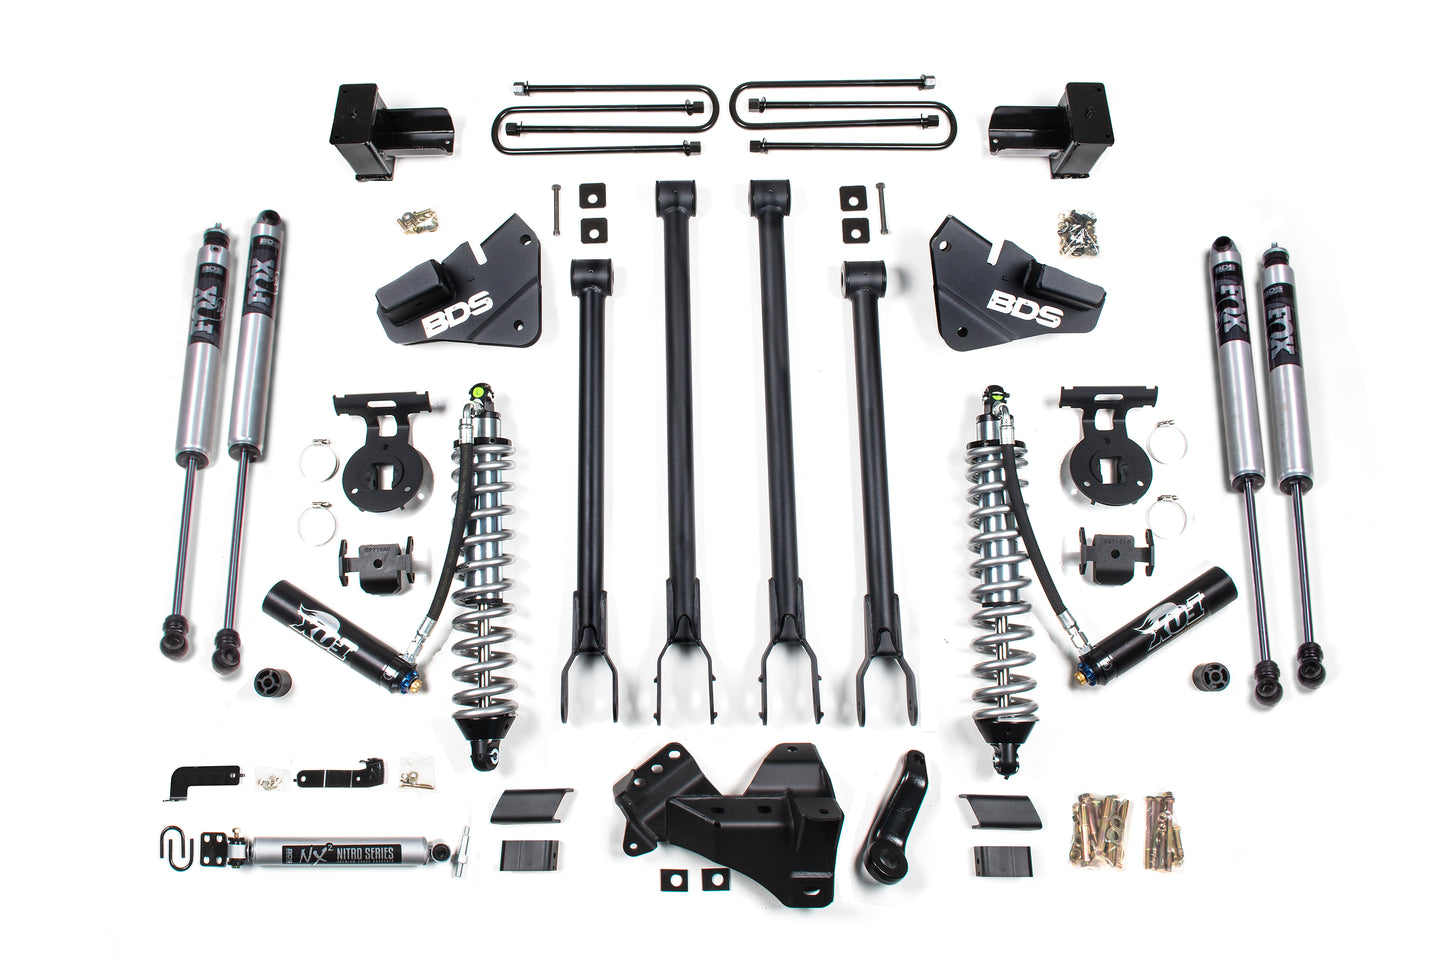 4 Inch Lift Kit - 4-Link & FOX 2.5 Coil-Over Conversion - Ford F250/F350 Super Duty (17-19) 4WD - Diesel